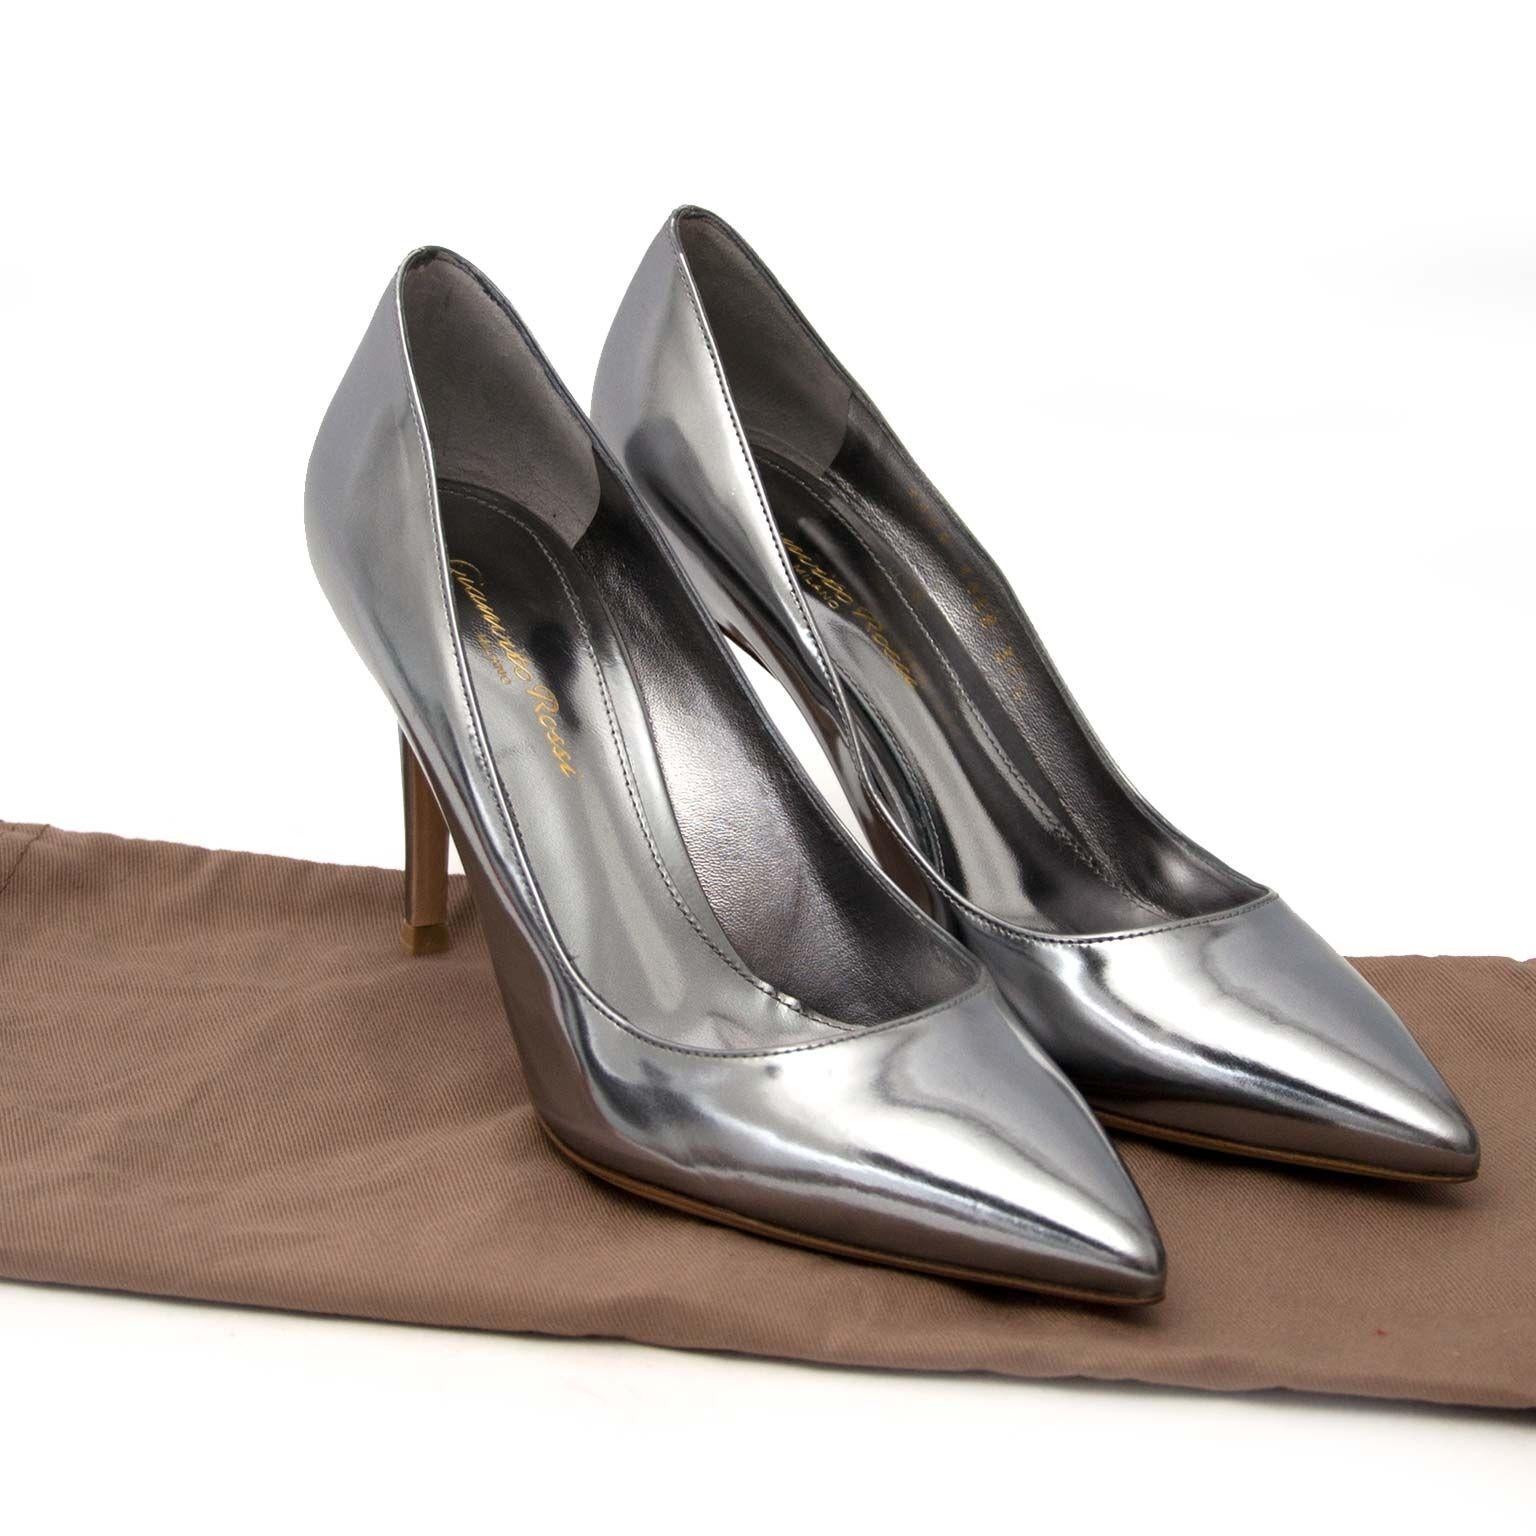 *NEVER WORN*

Estimated retail price: €560

Gianvito Rossi Metallic Pumps - Size 37

Anything metallic will be a sure shot winner this year. 
These metallic pumps are made with the greatest care and are proportioned for the most comfortable